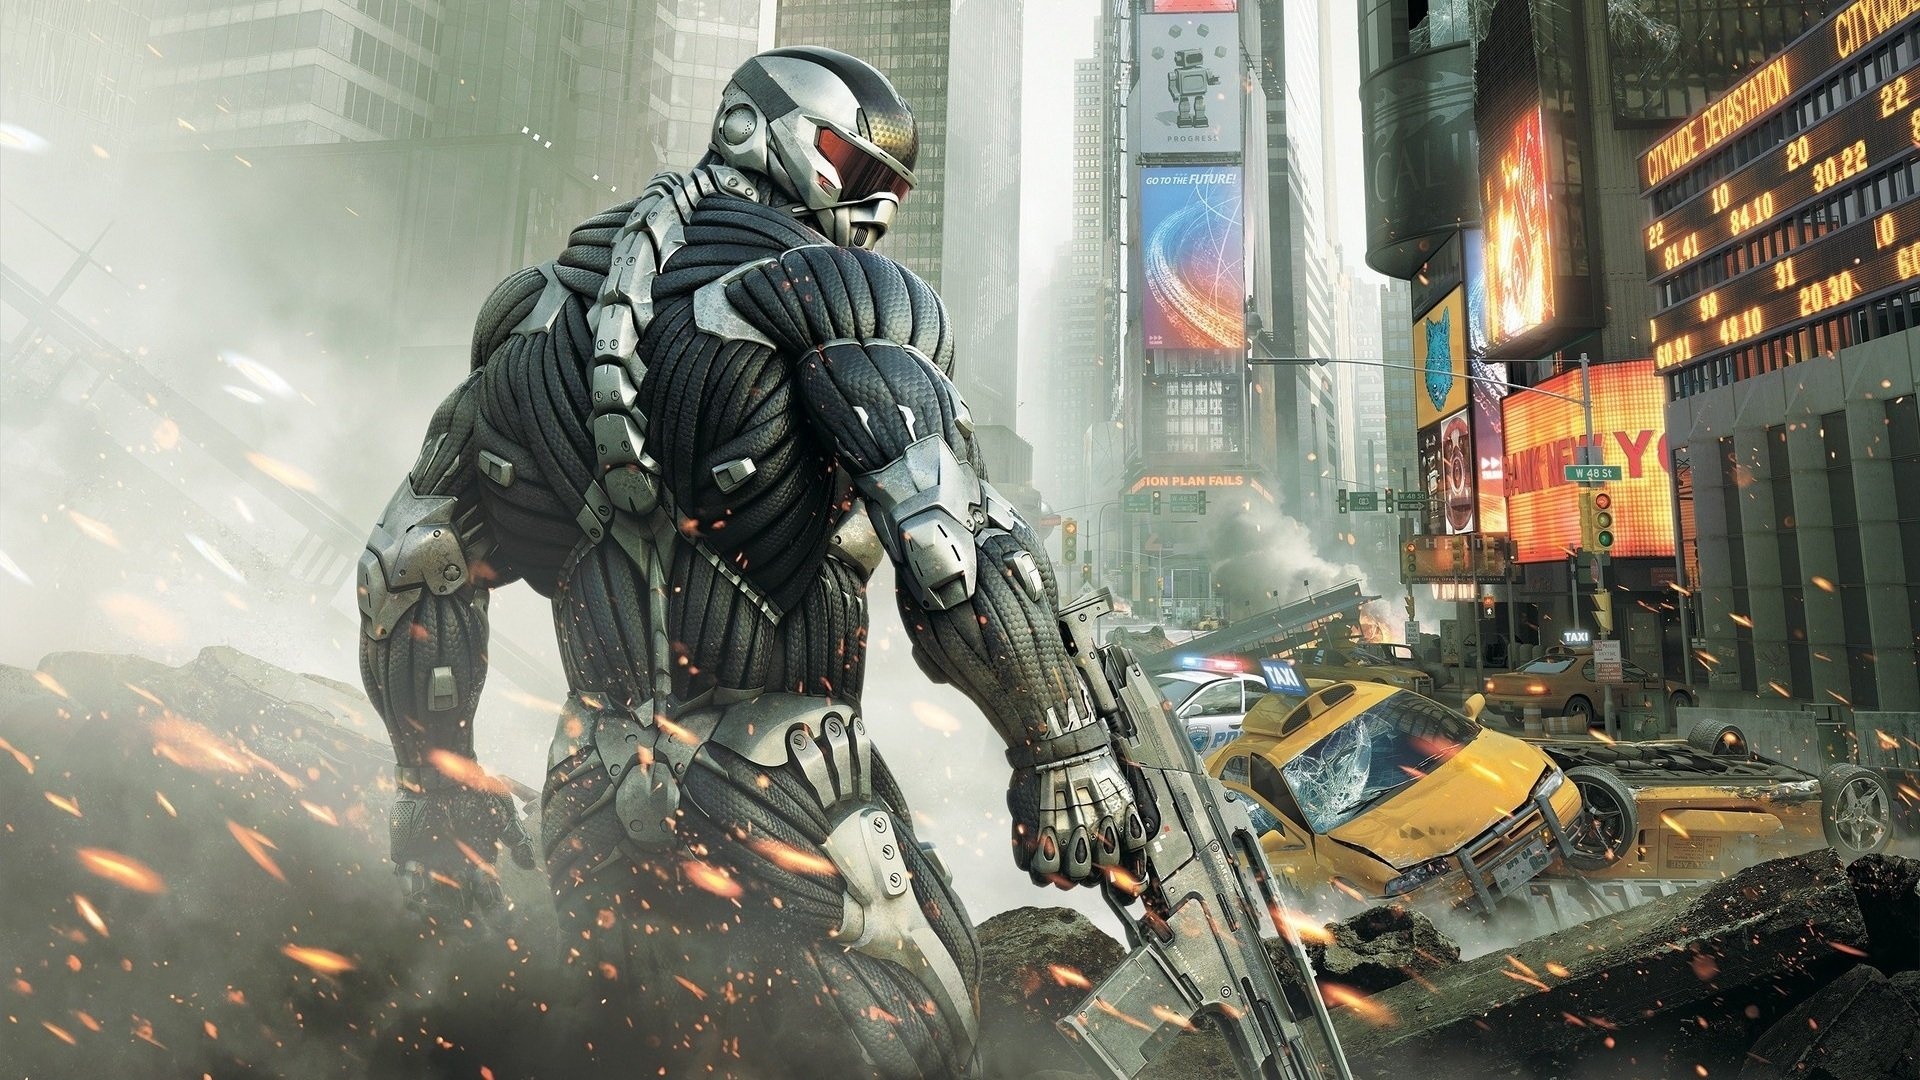 Crysis, Wallpaper collection, Epic game art, Immersive experience, 1920x1080 Full HD Desktop